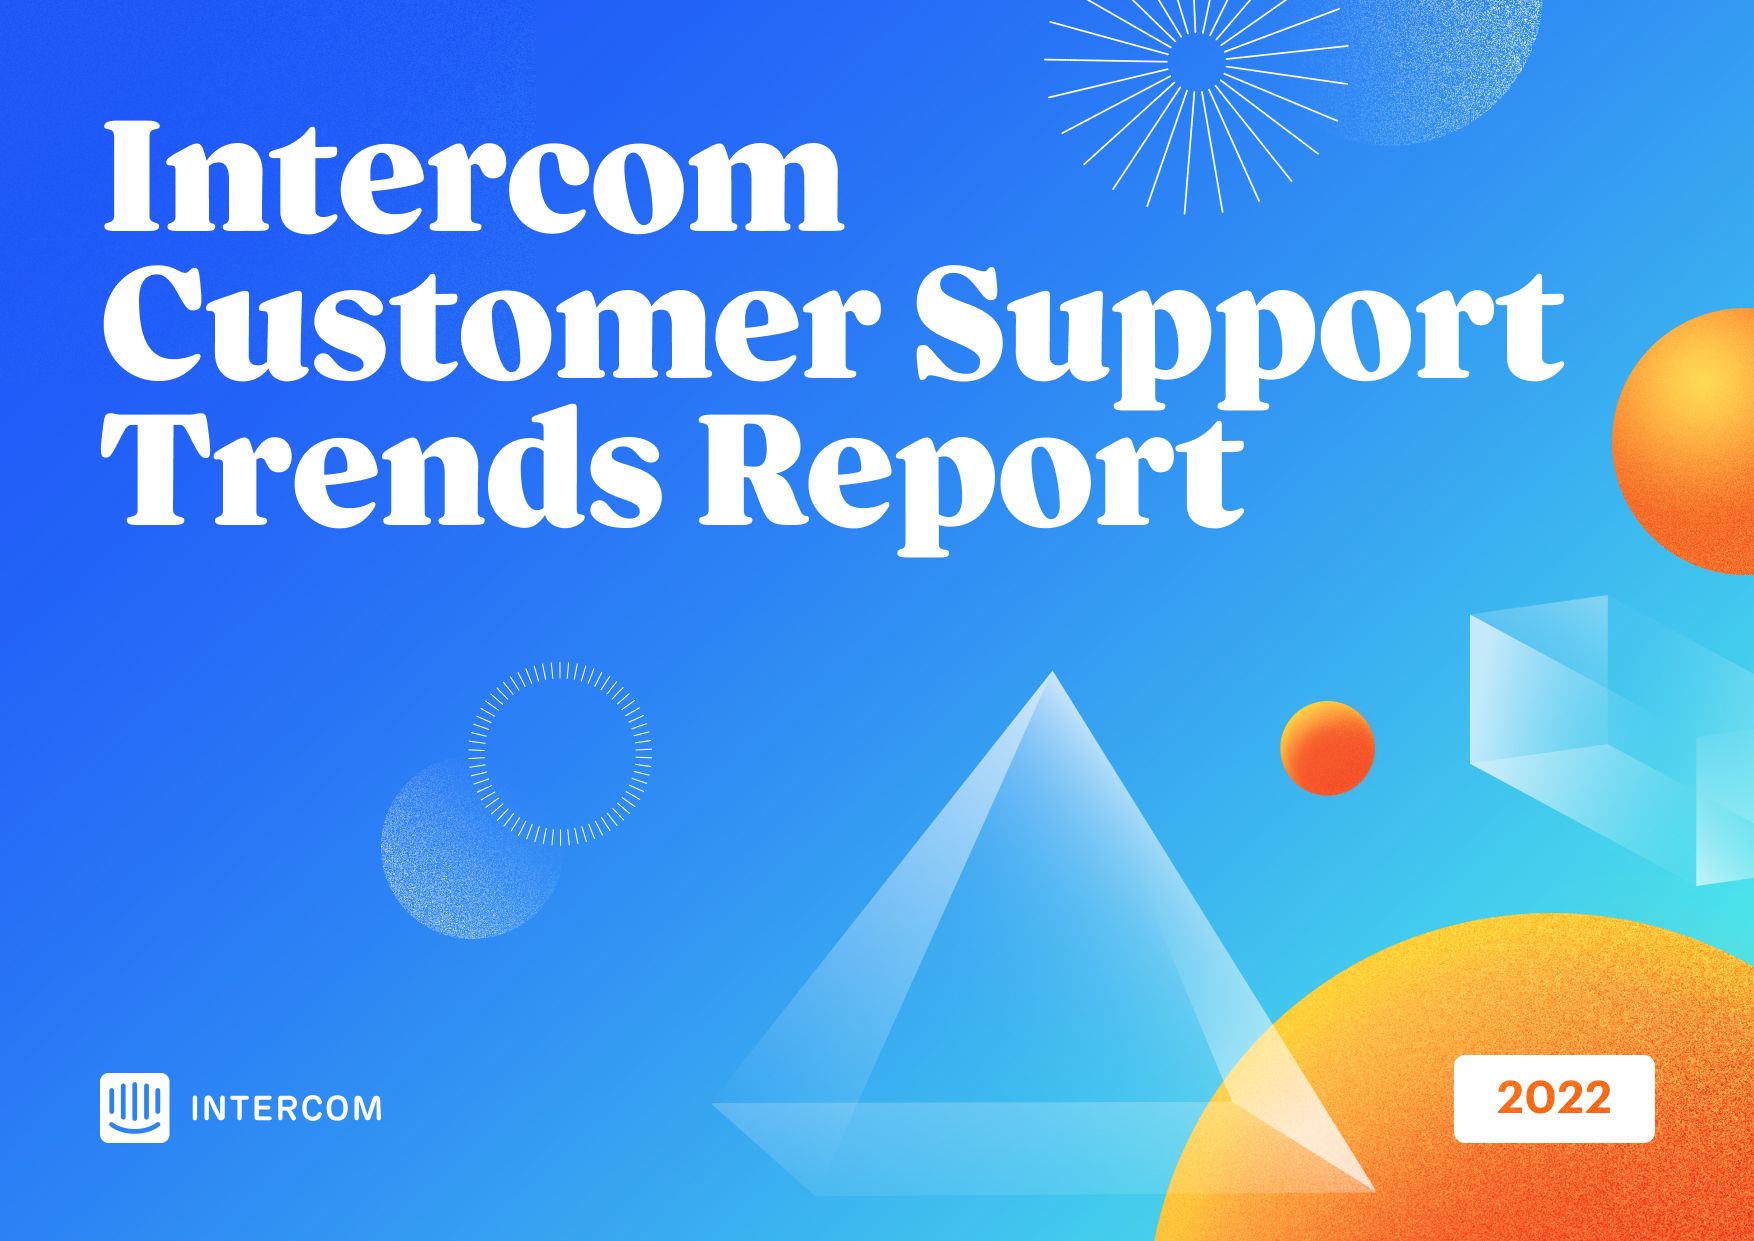 The 5 customer support trends to watch in 2022